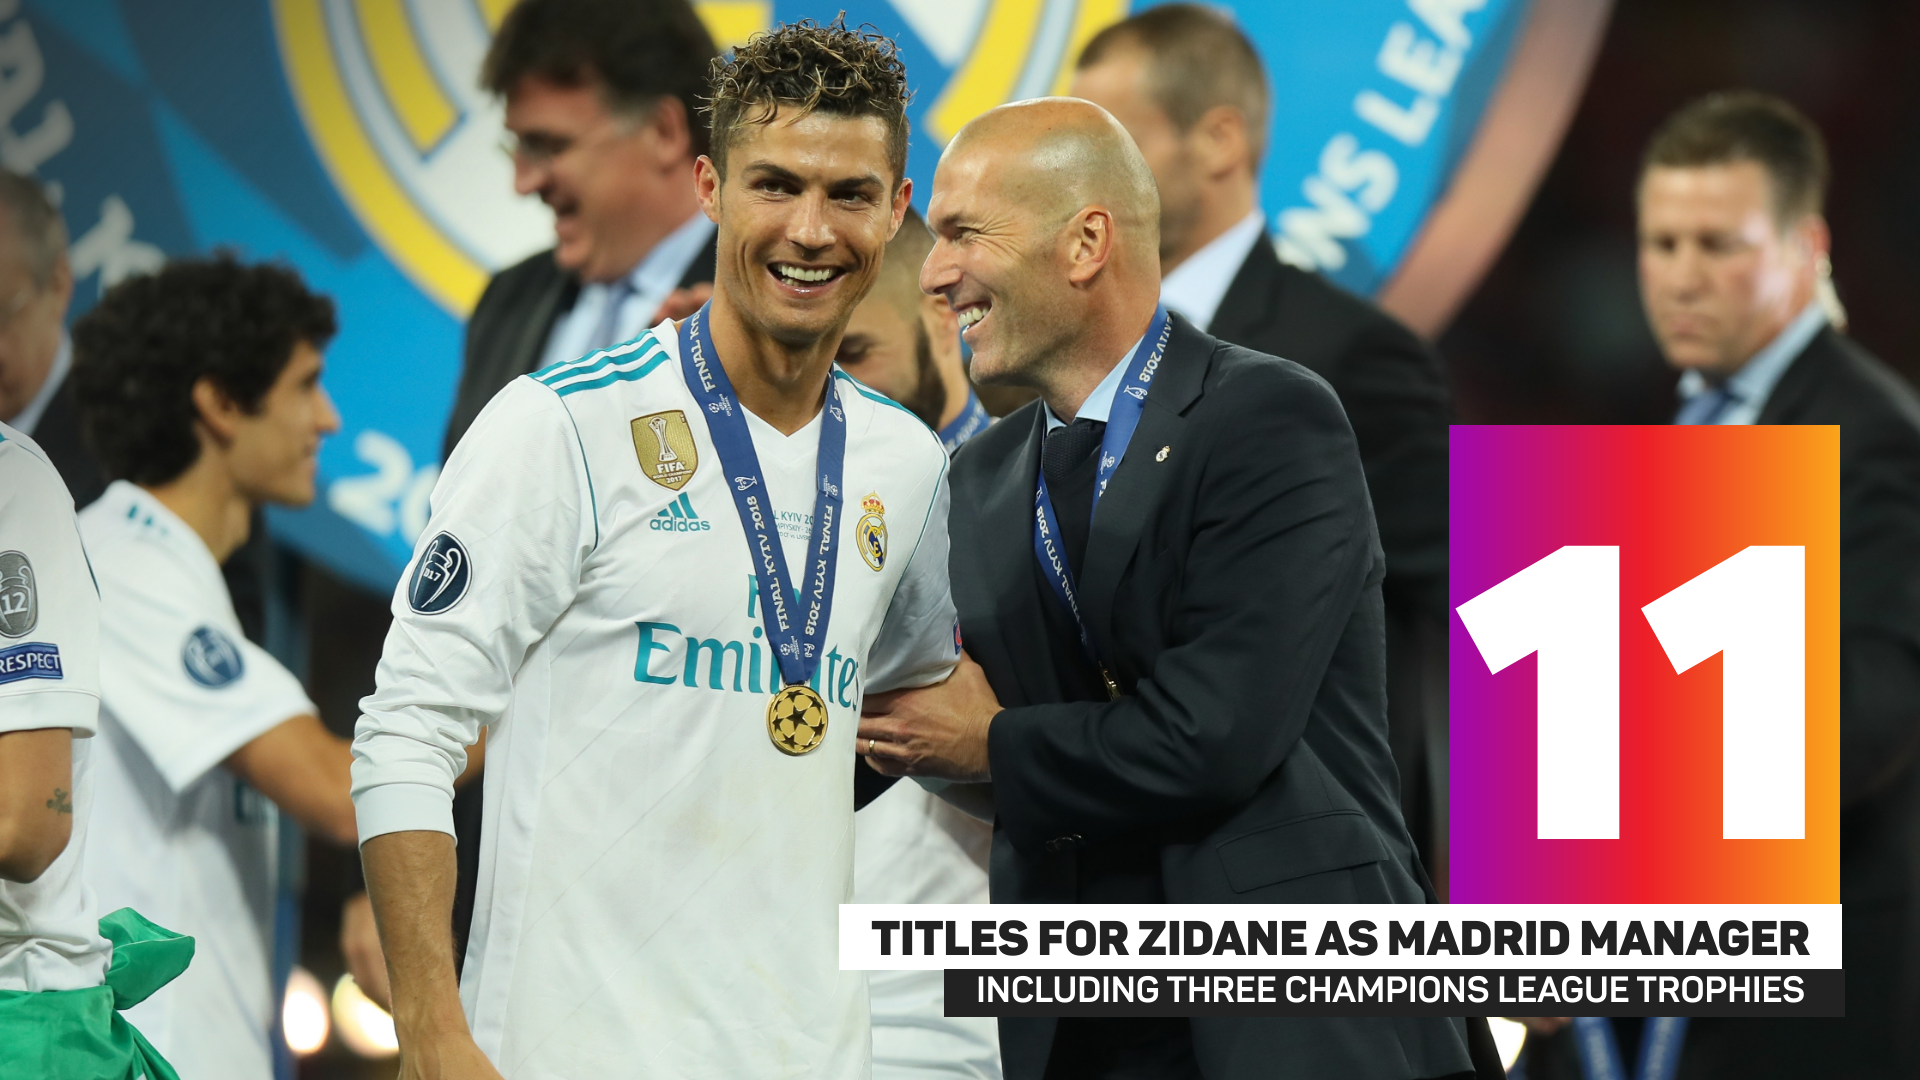 Zinedine Zidane's managerial record at Real Madrid